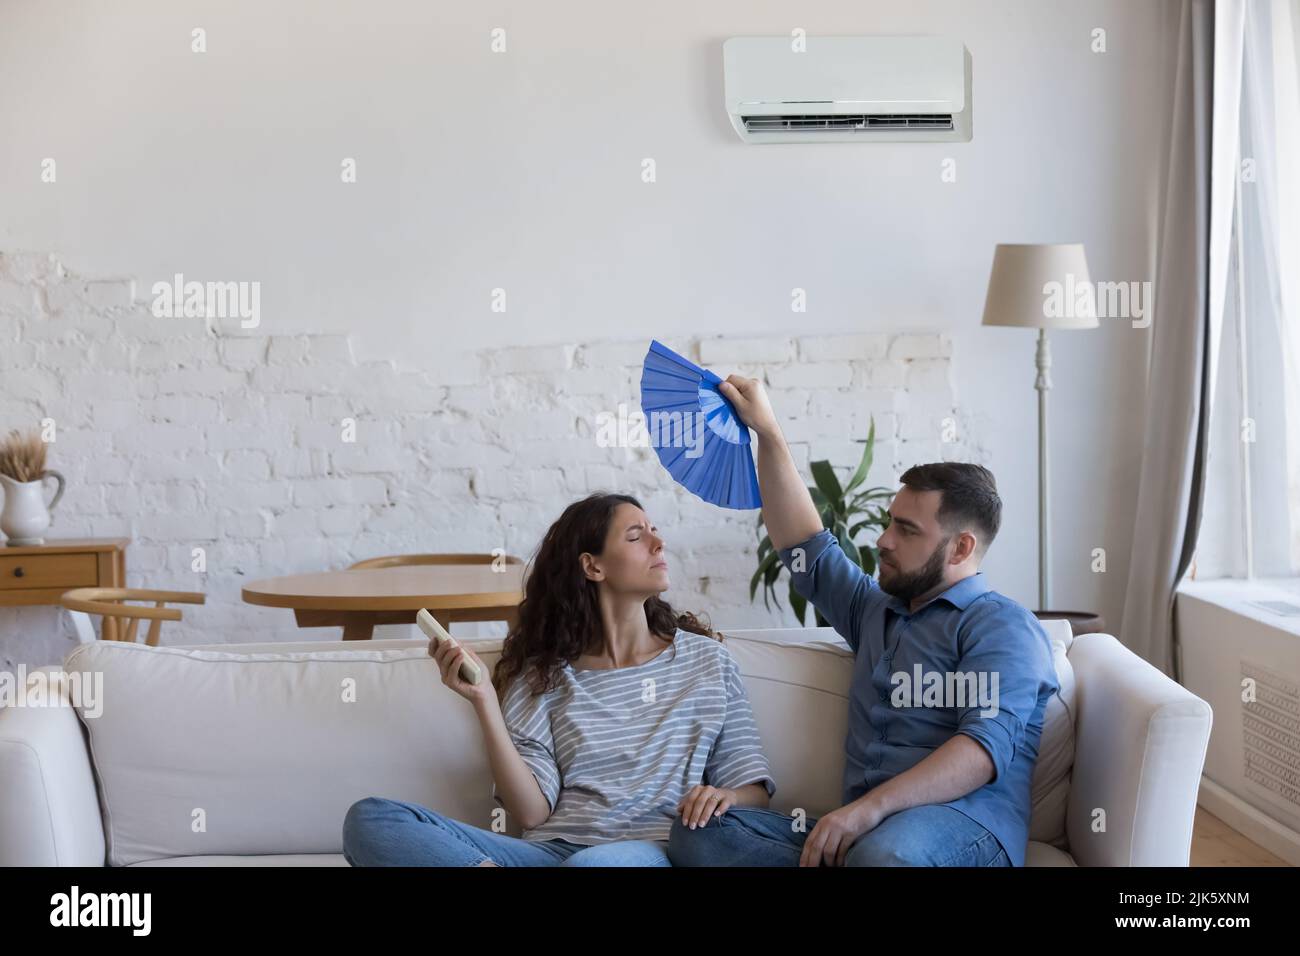 Young couple frustrated with heat, waving handheld fan Stock Photo